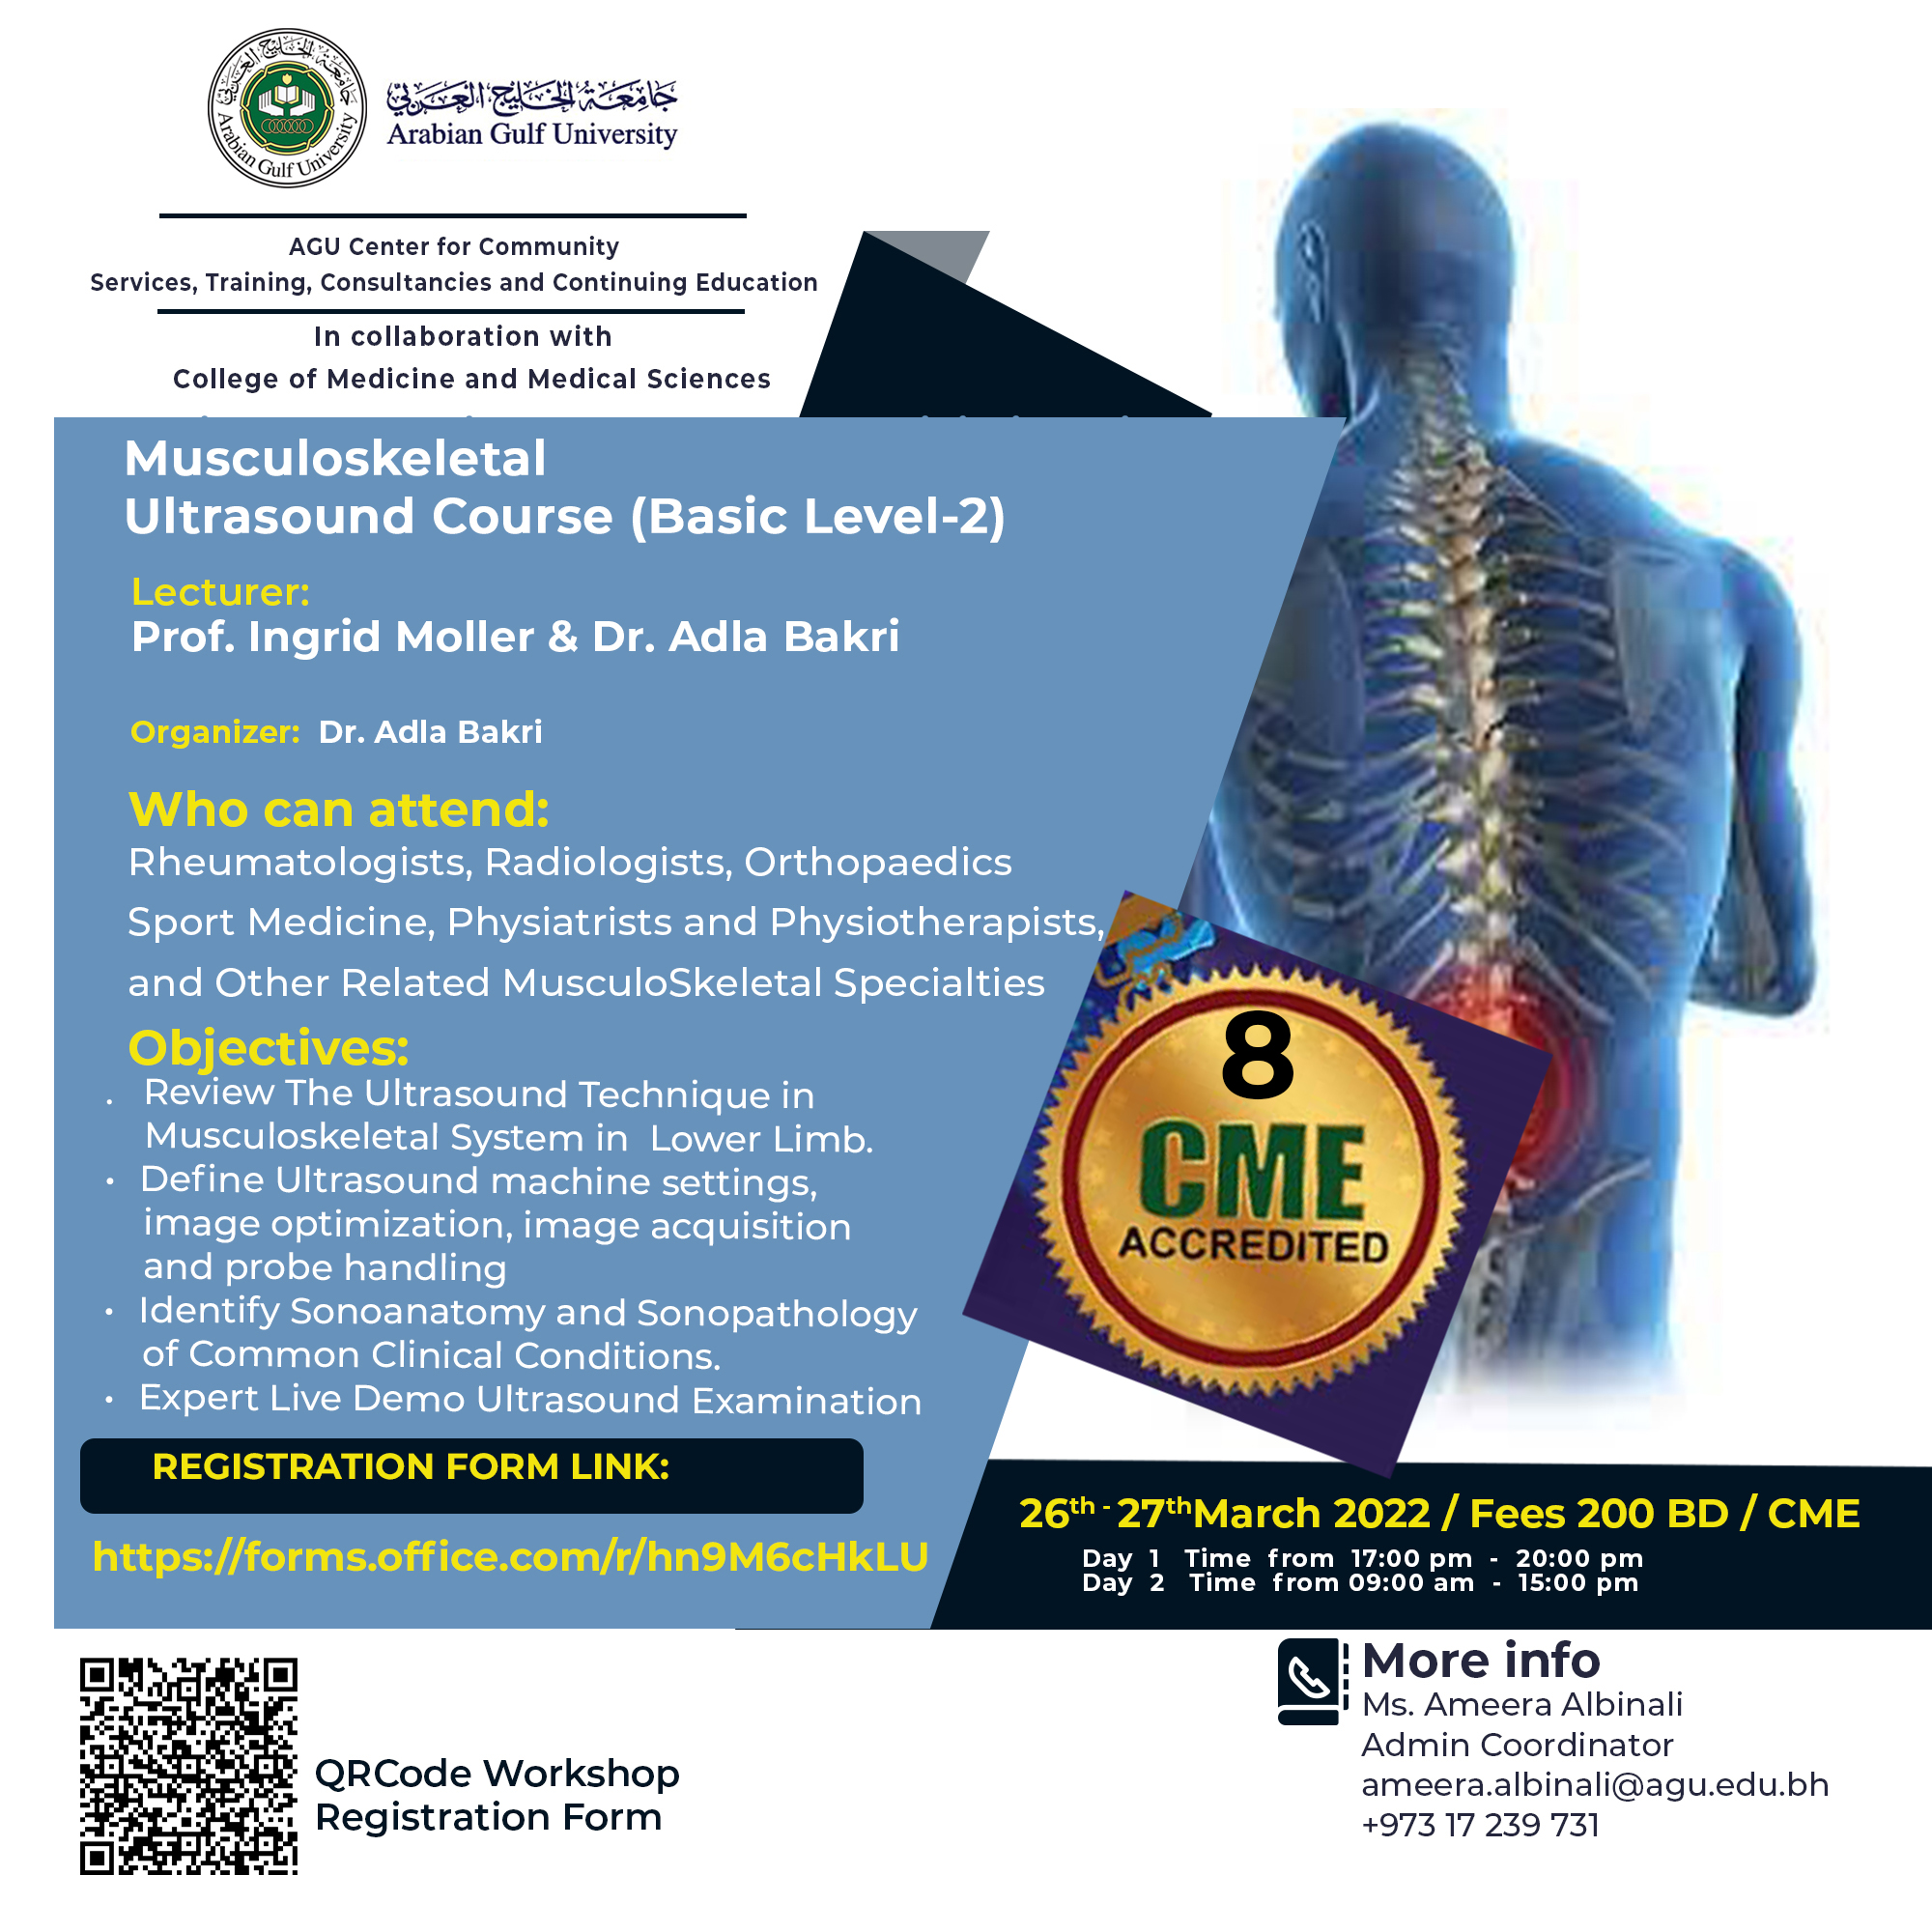 Musculoskeletal Ultrasound Course (Basic Level-2)